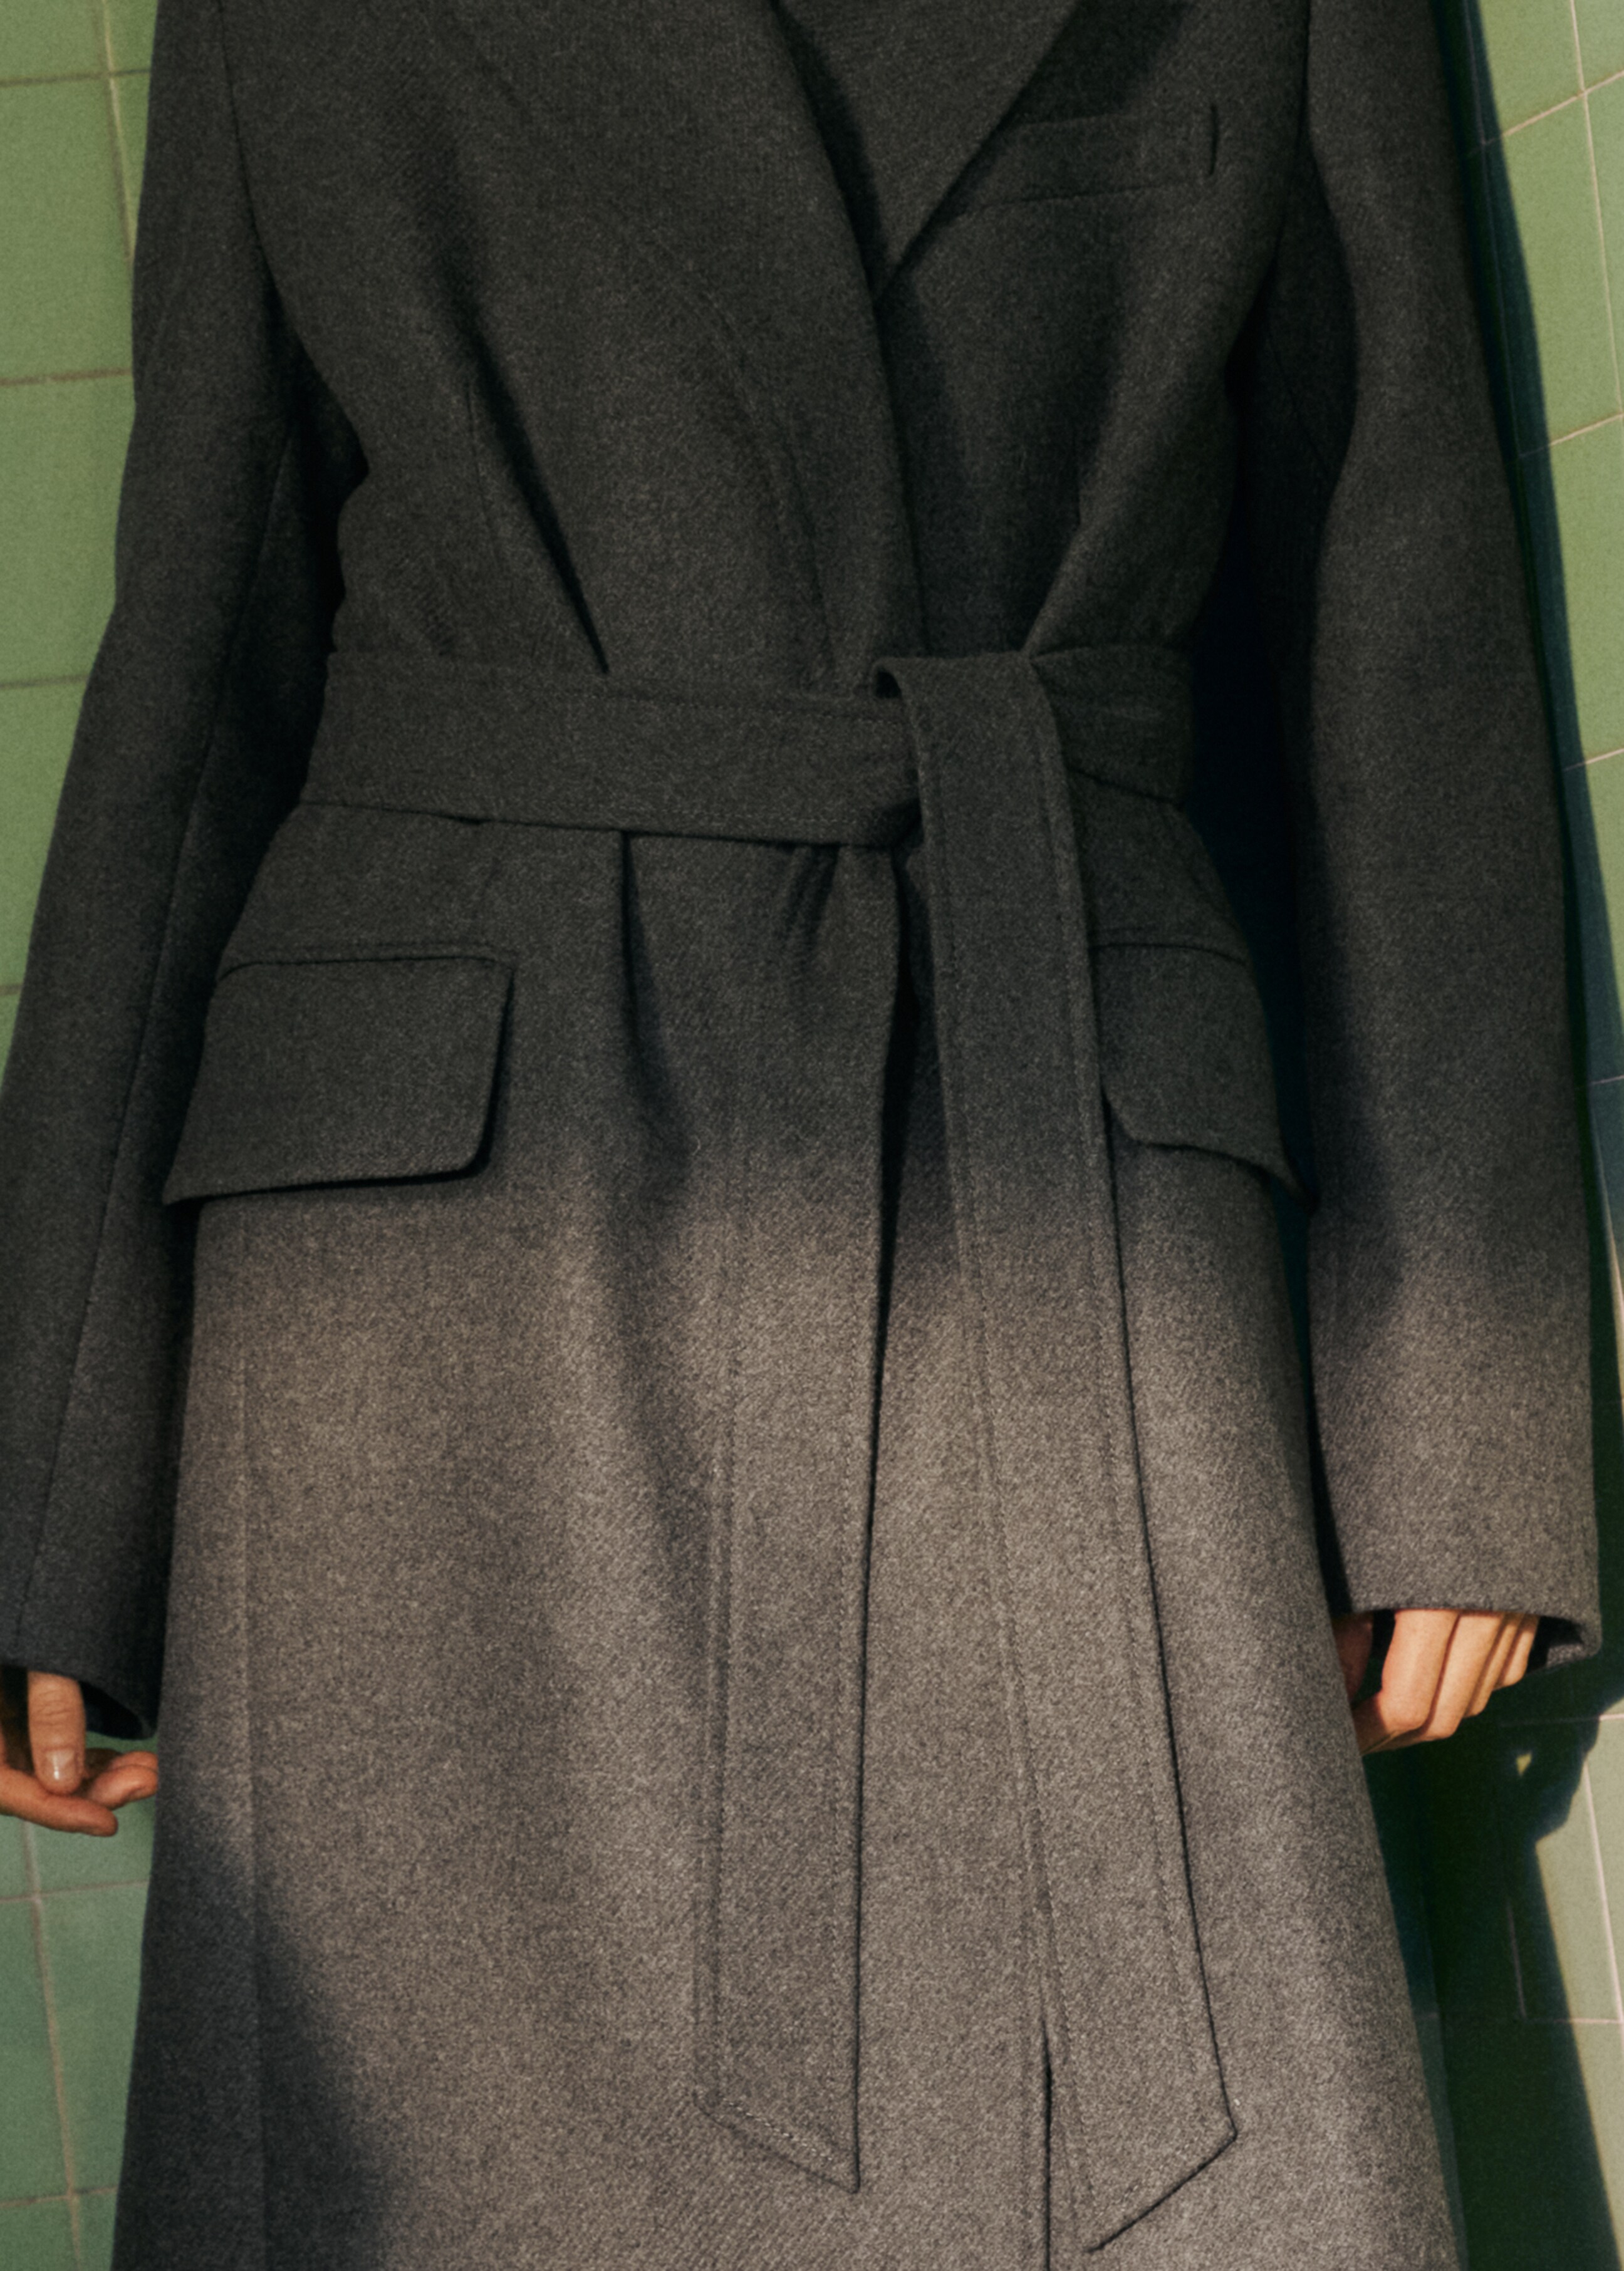 Long coat with lapels - Details of the article 7